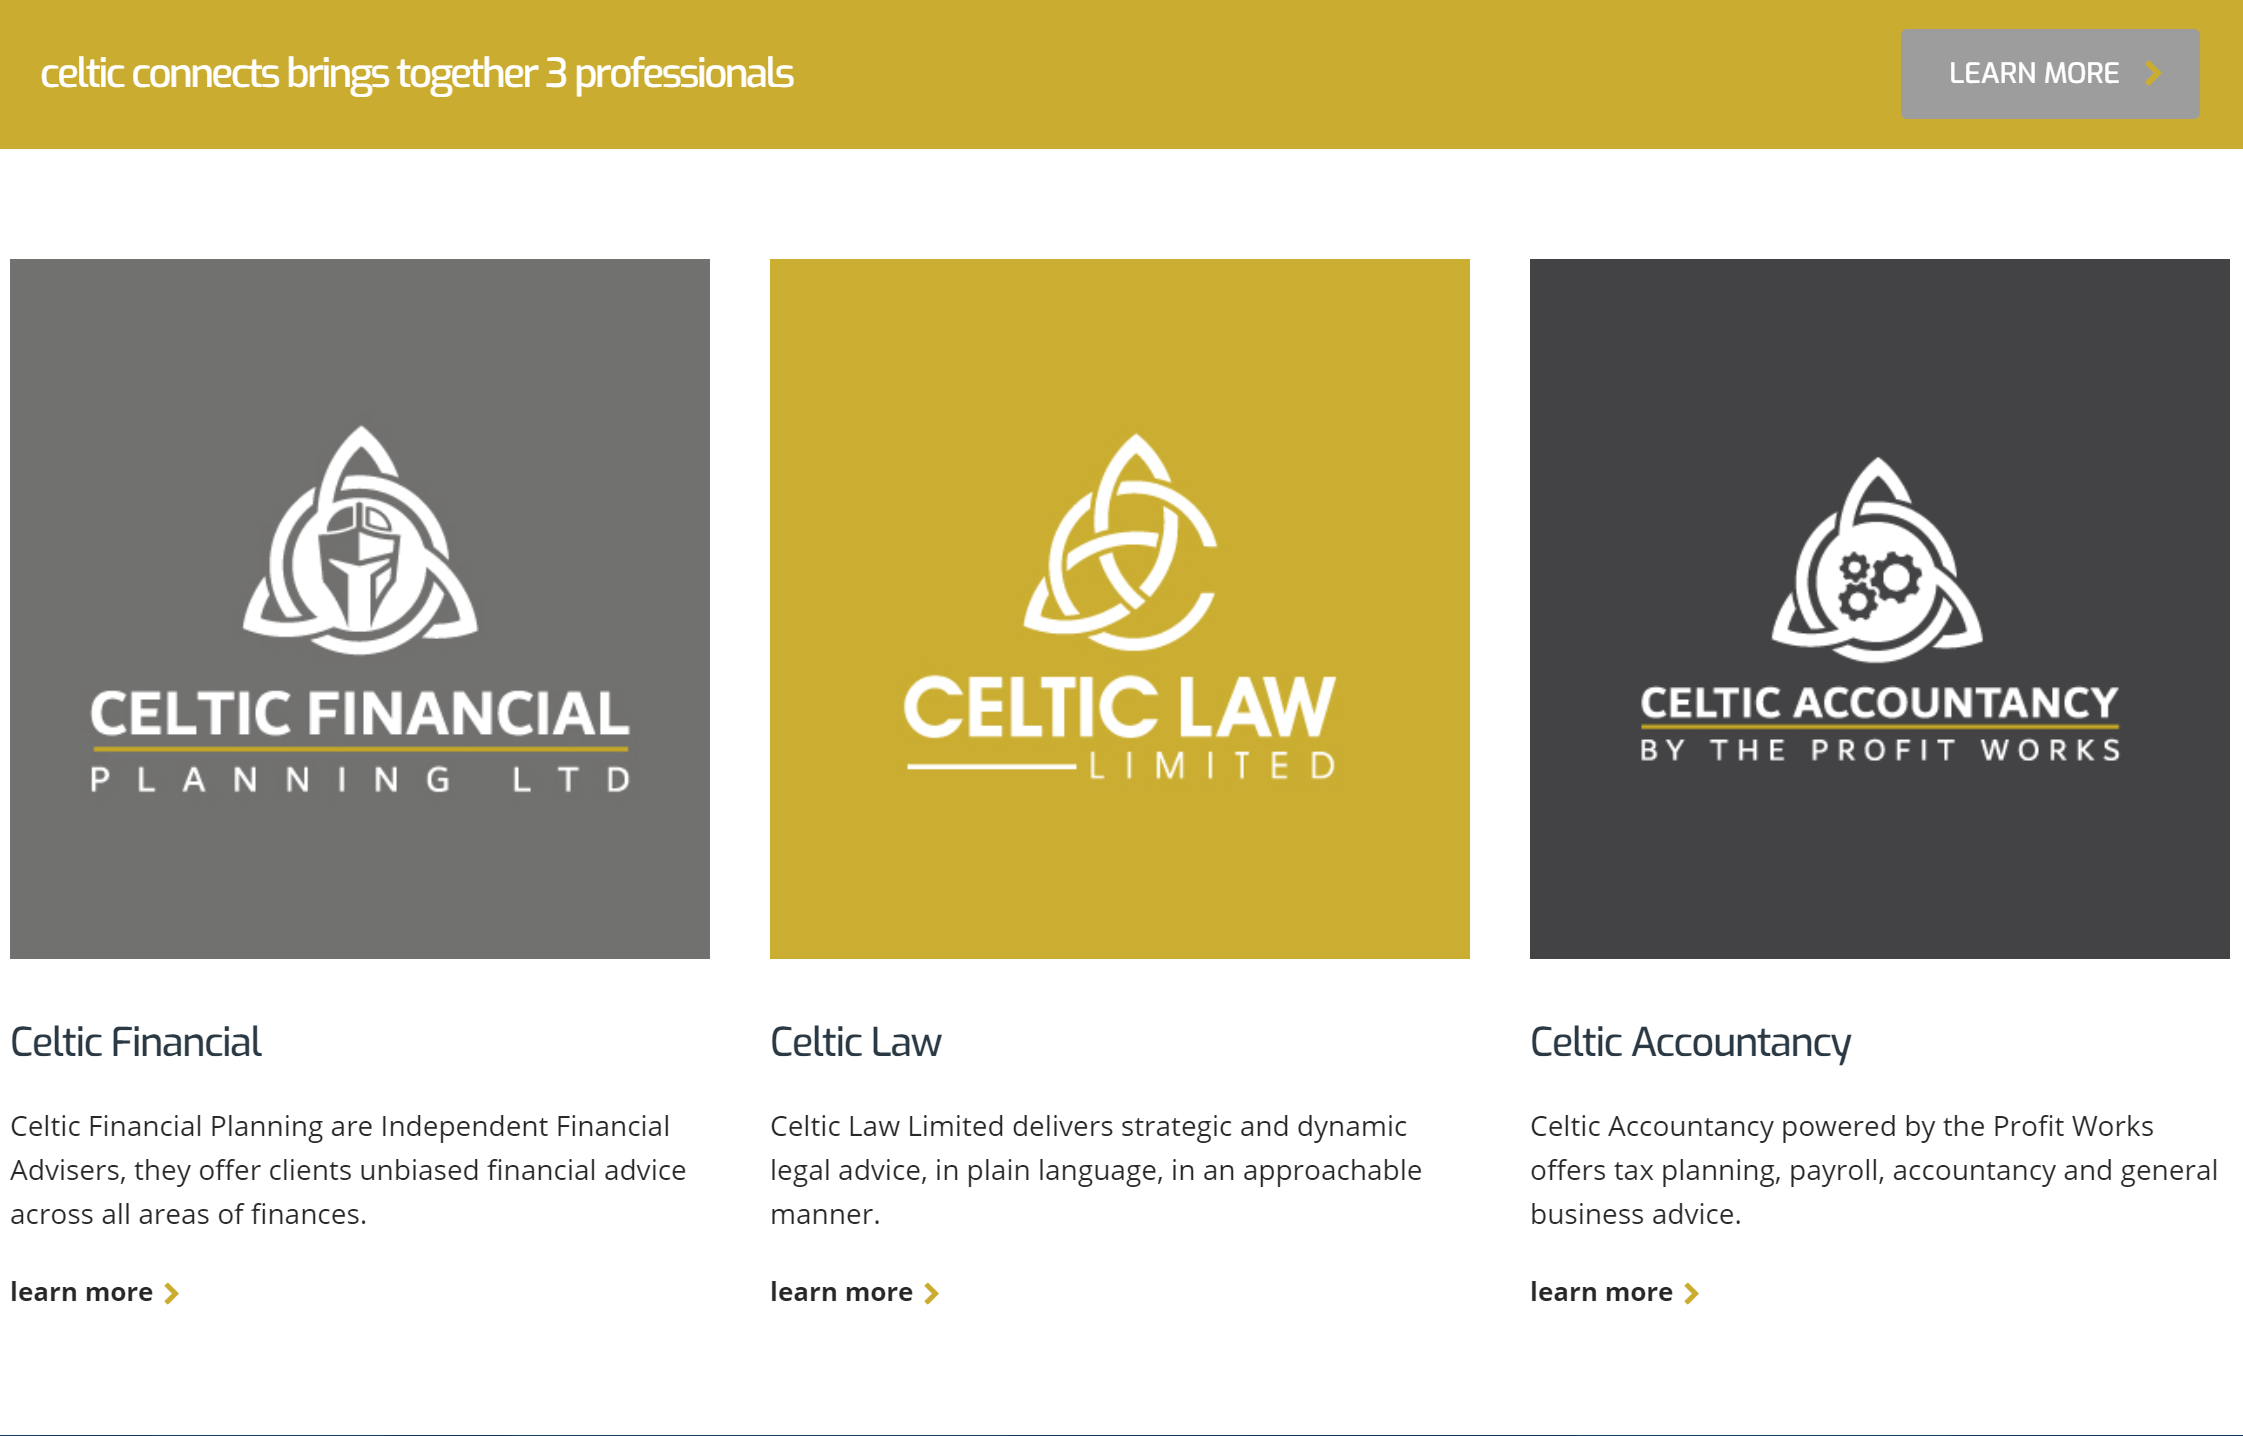 Family Office Celtic Connects